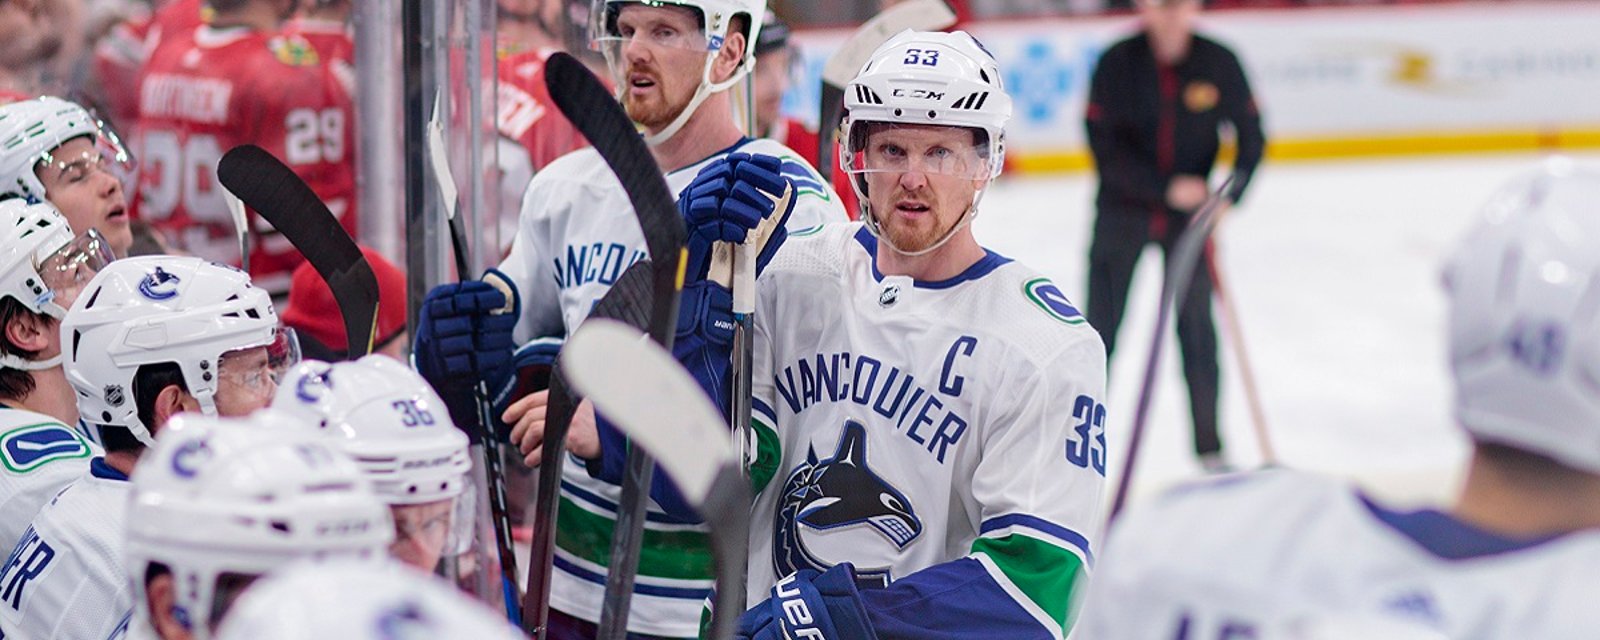 Daniel and Henrik Sedin make huge donation to children impacted by COVID-19.